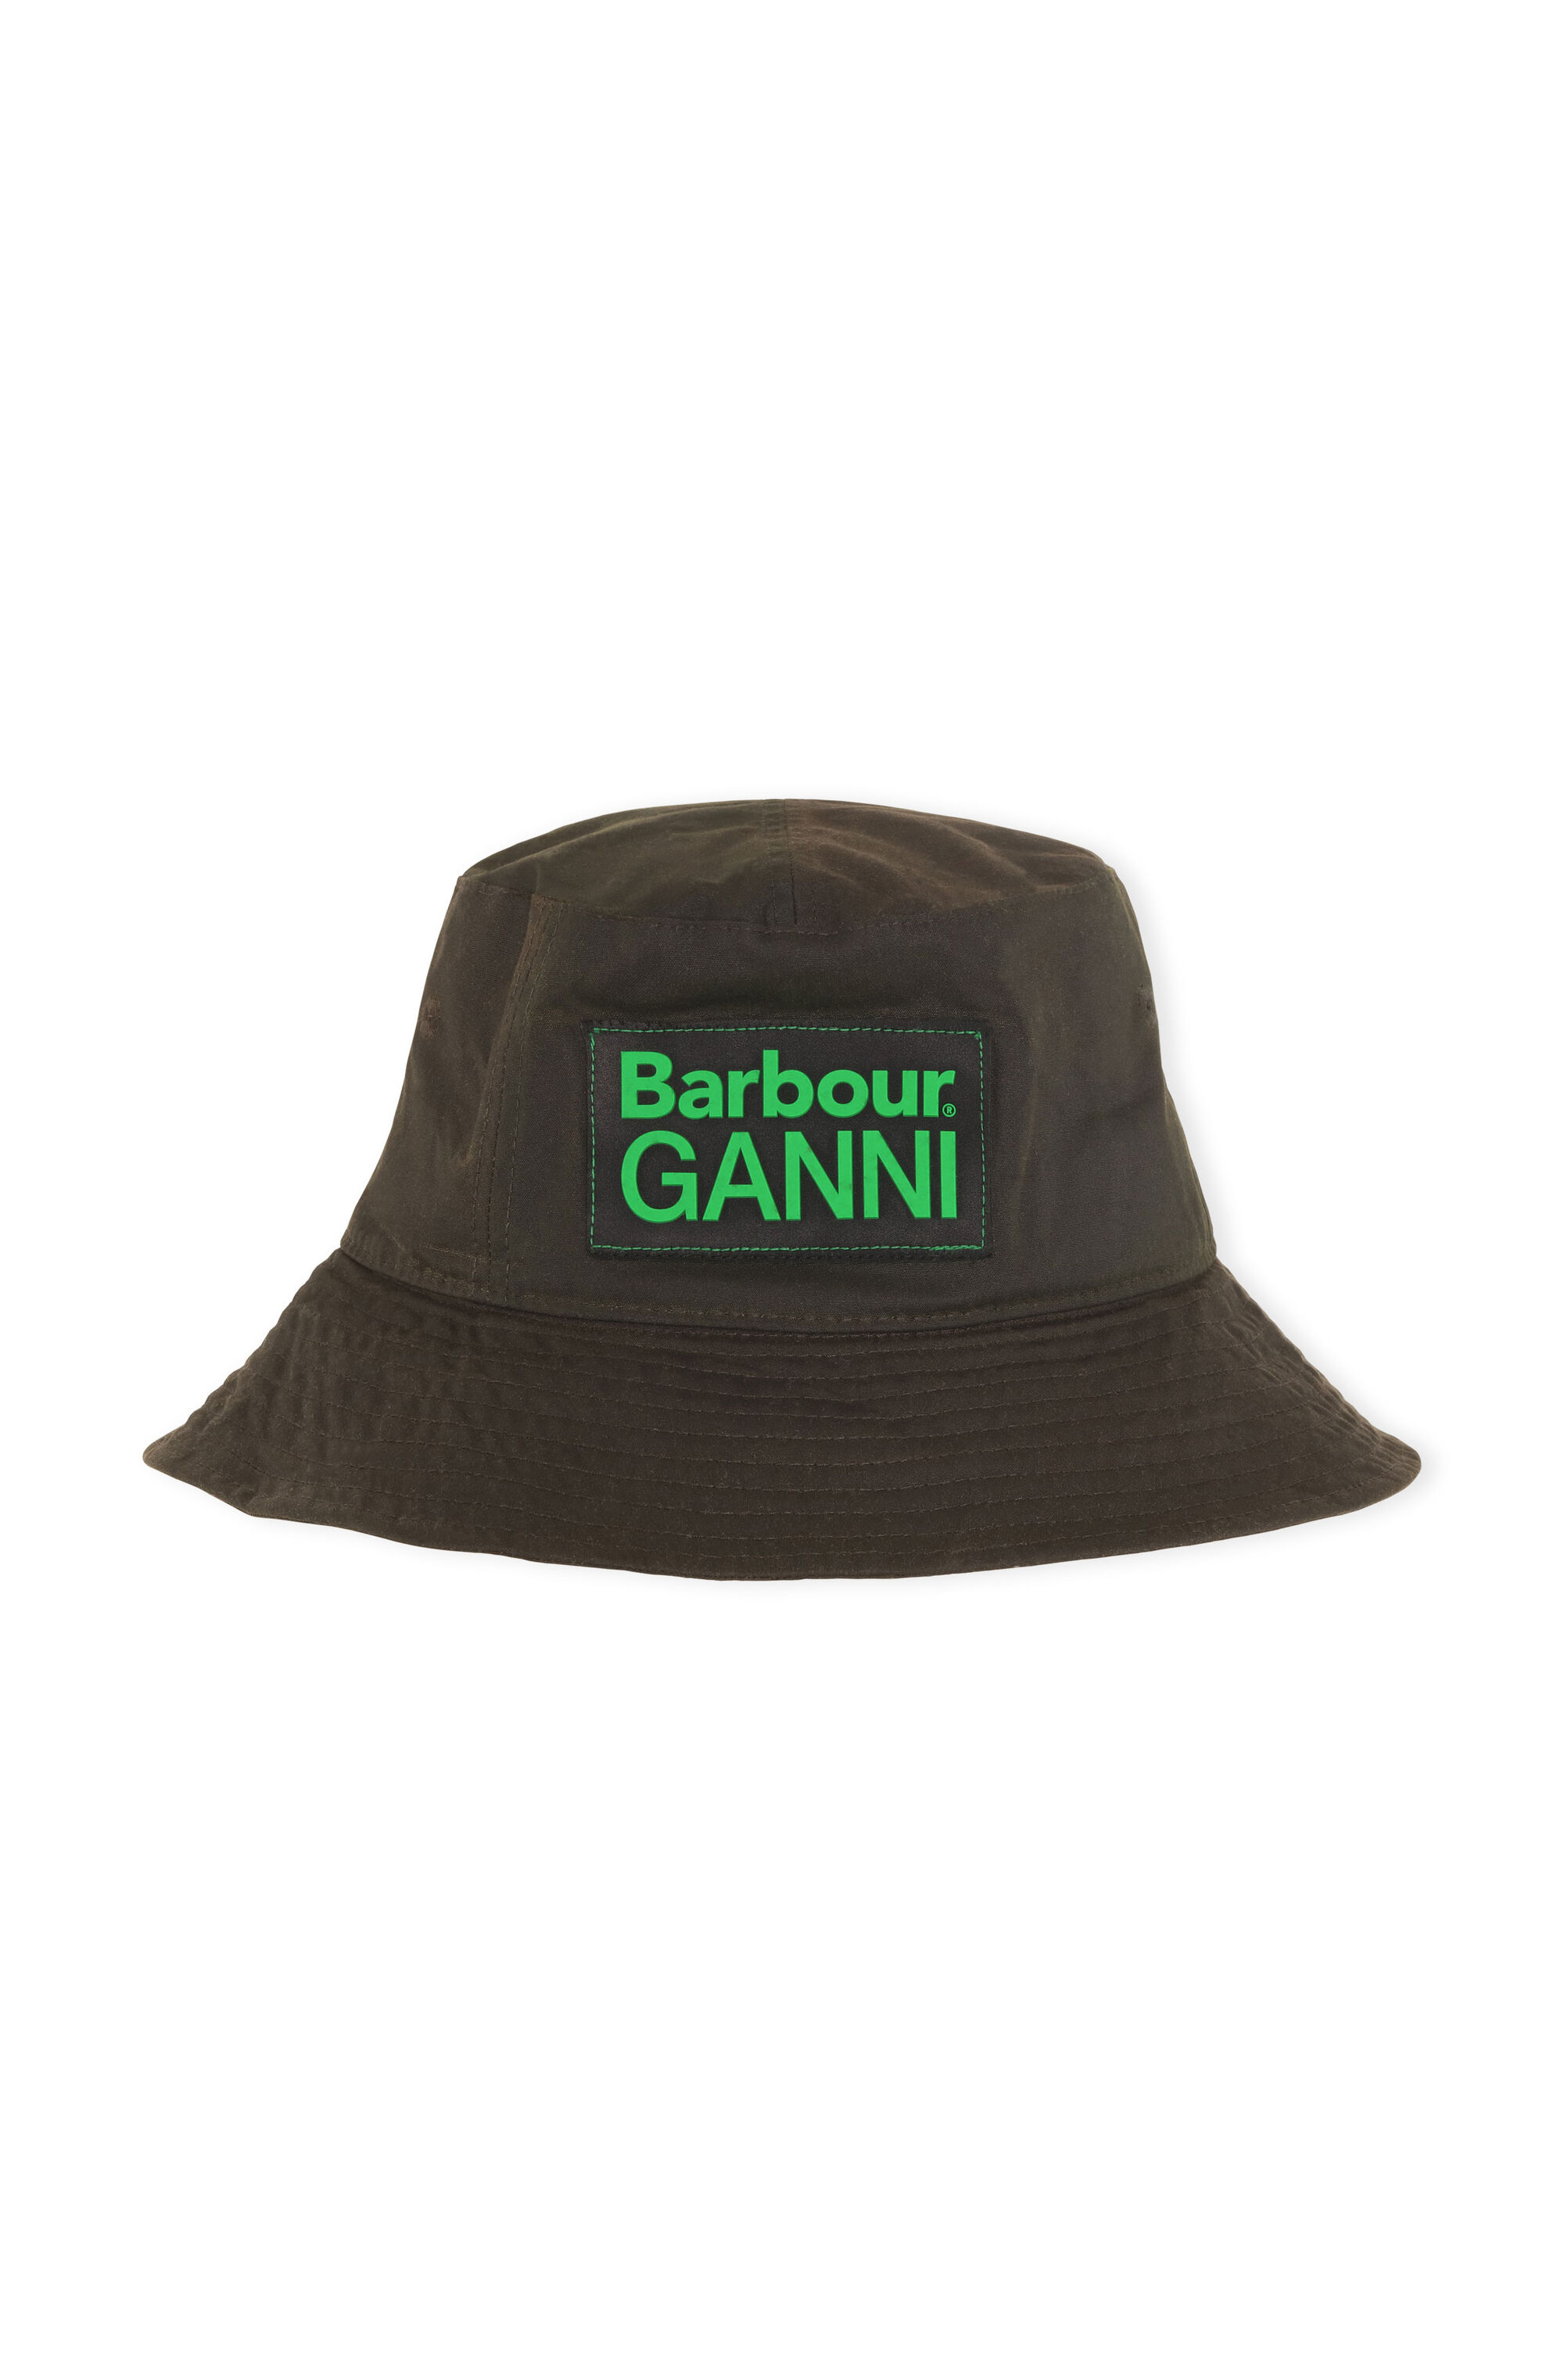 Shop the New Ganni x Barbour Collaboration | Who What Wear